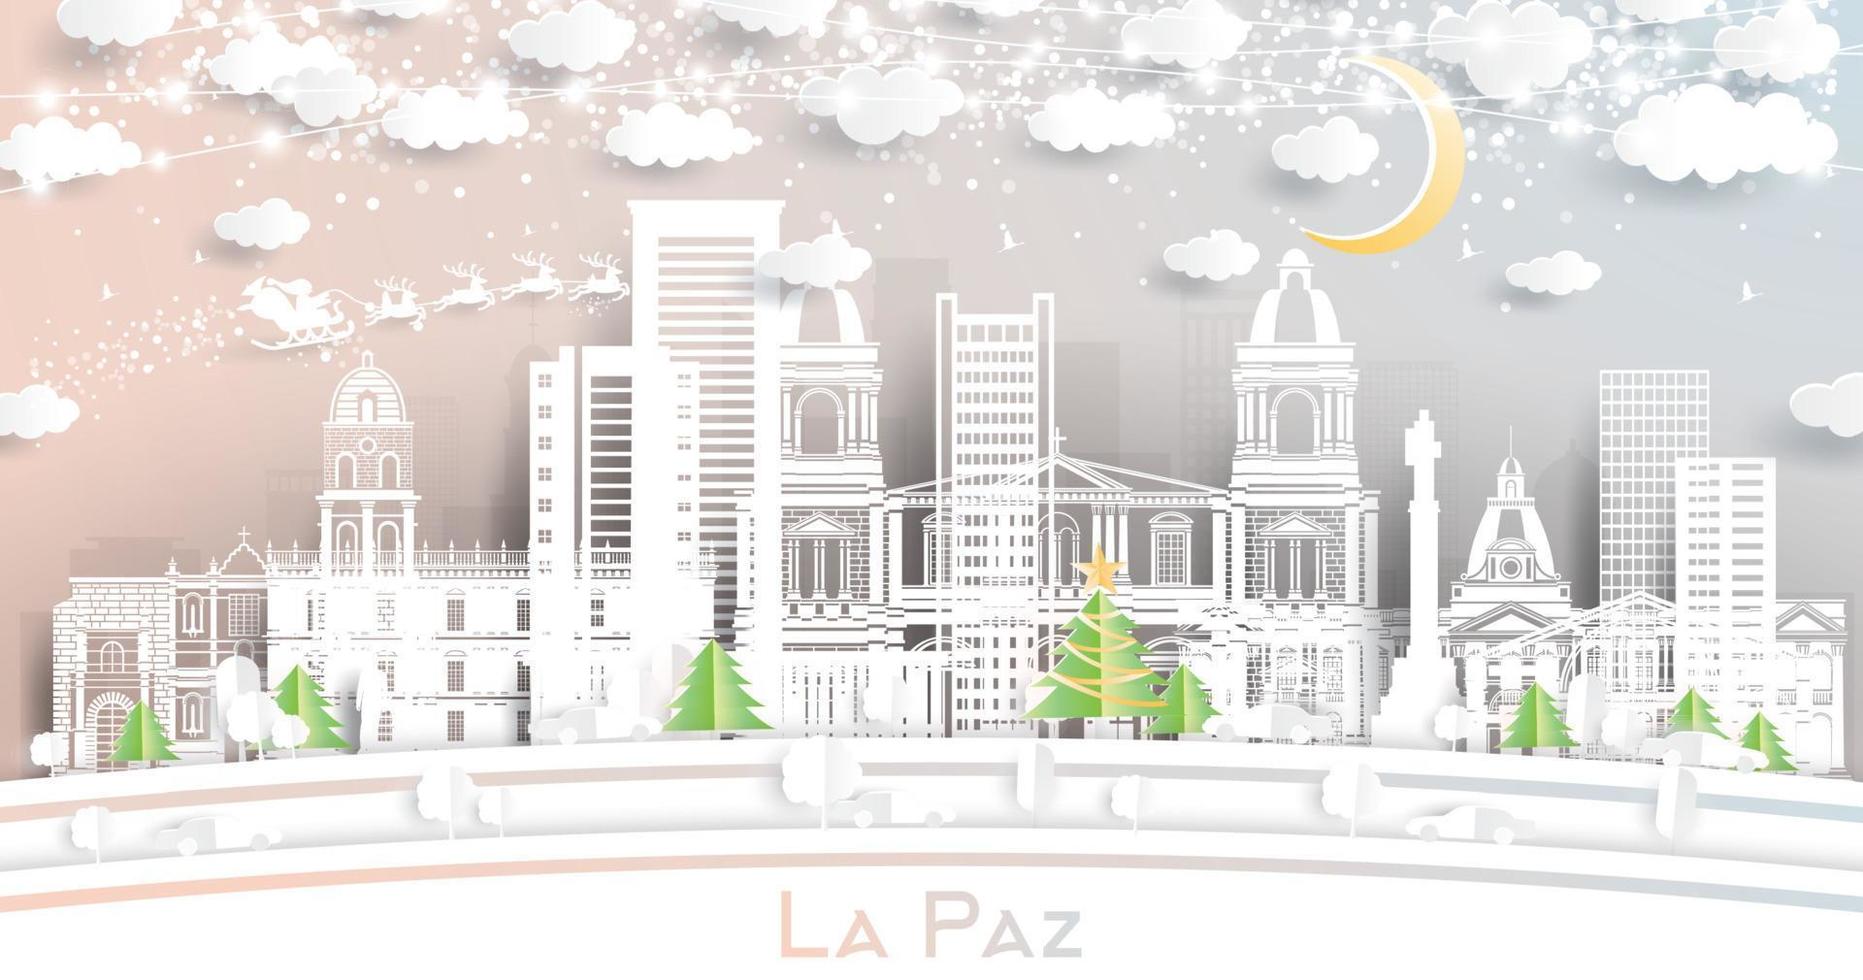 La Paz Bolivia City Skyline in Paper Cut Style with Snowflakes, Moon and Neon Garland. vector